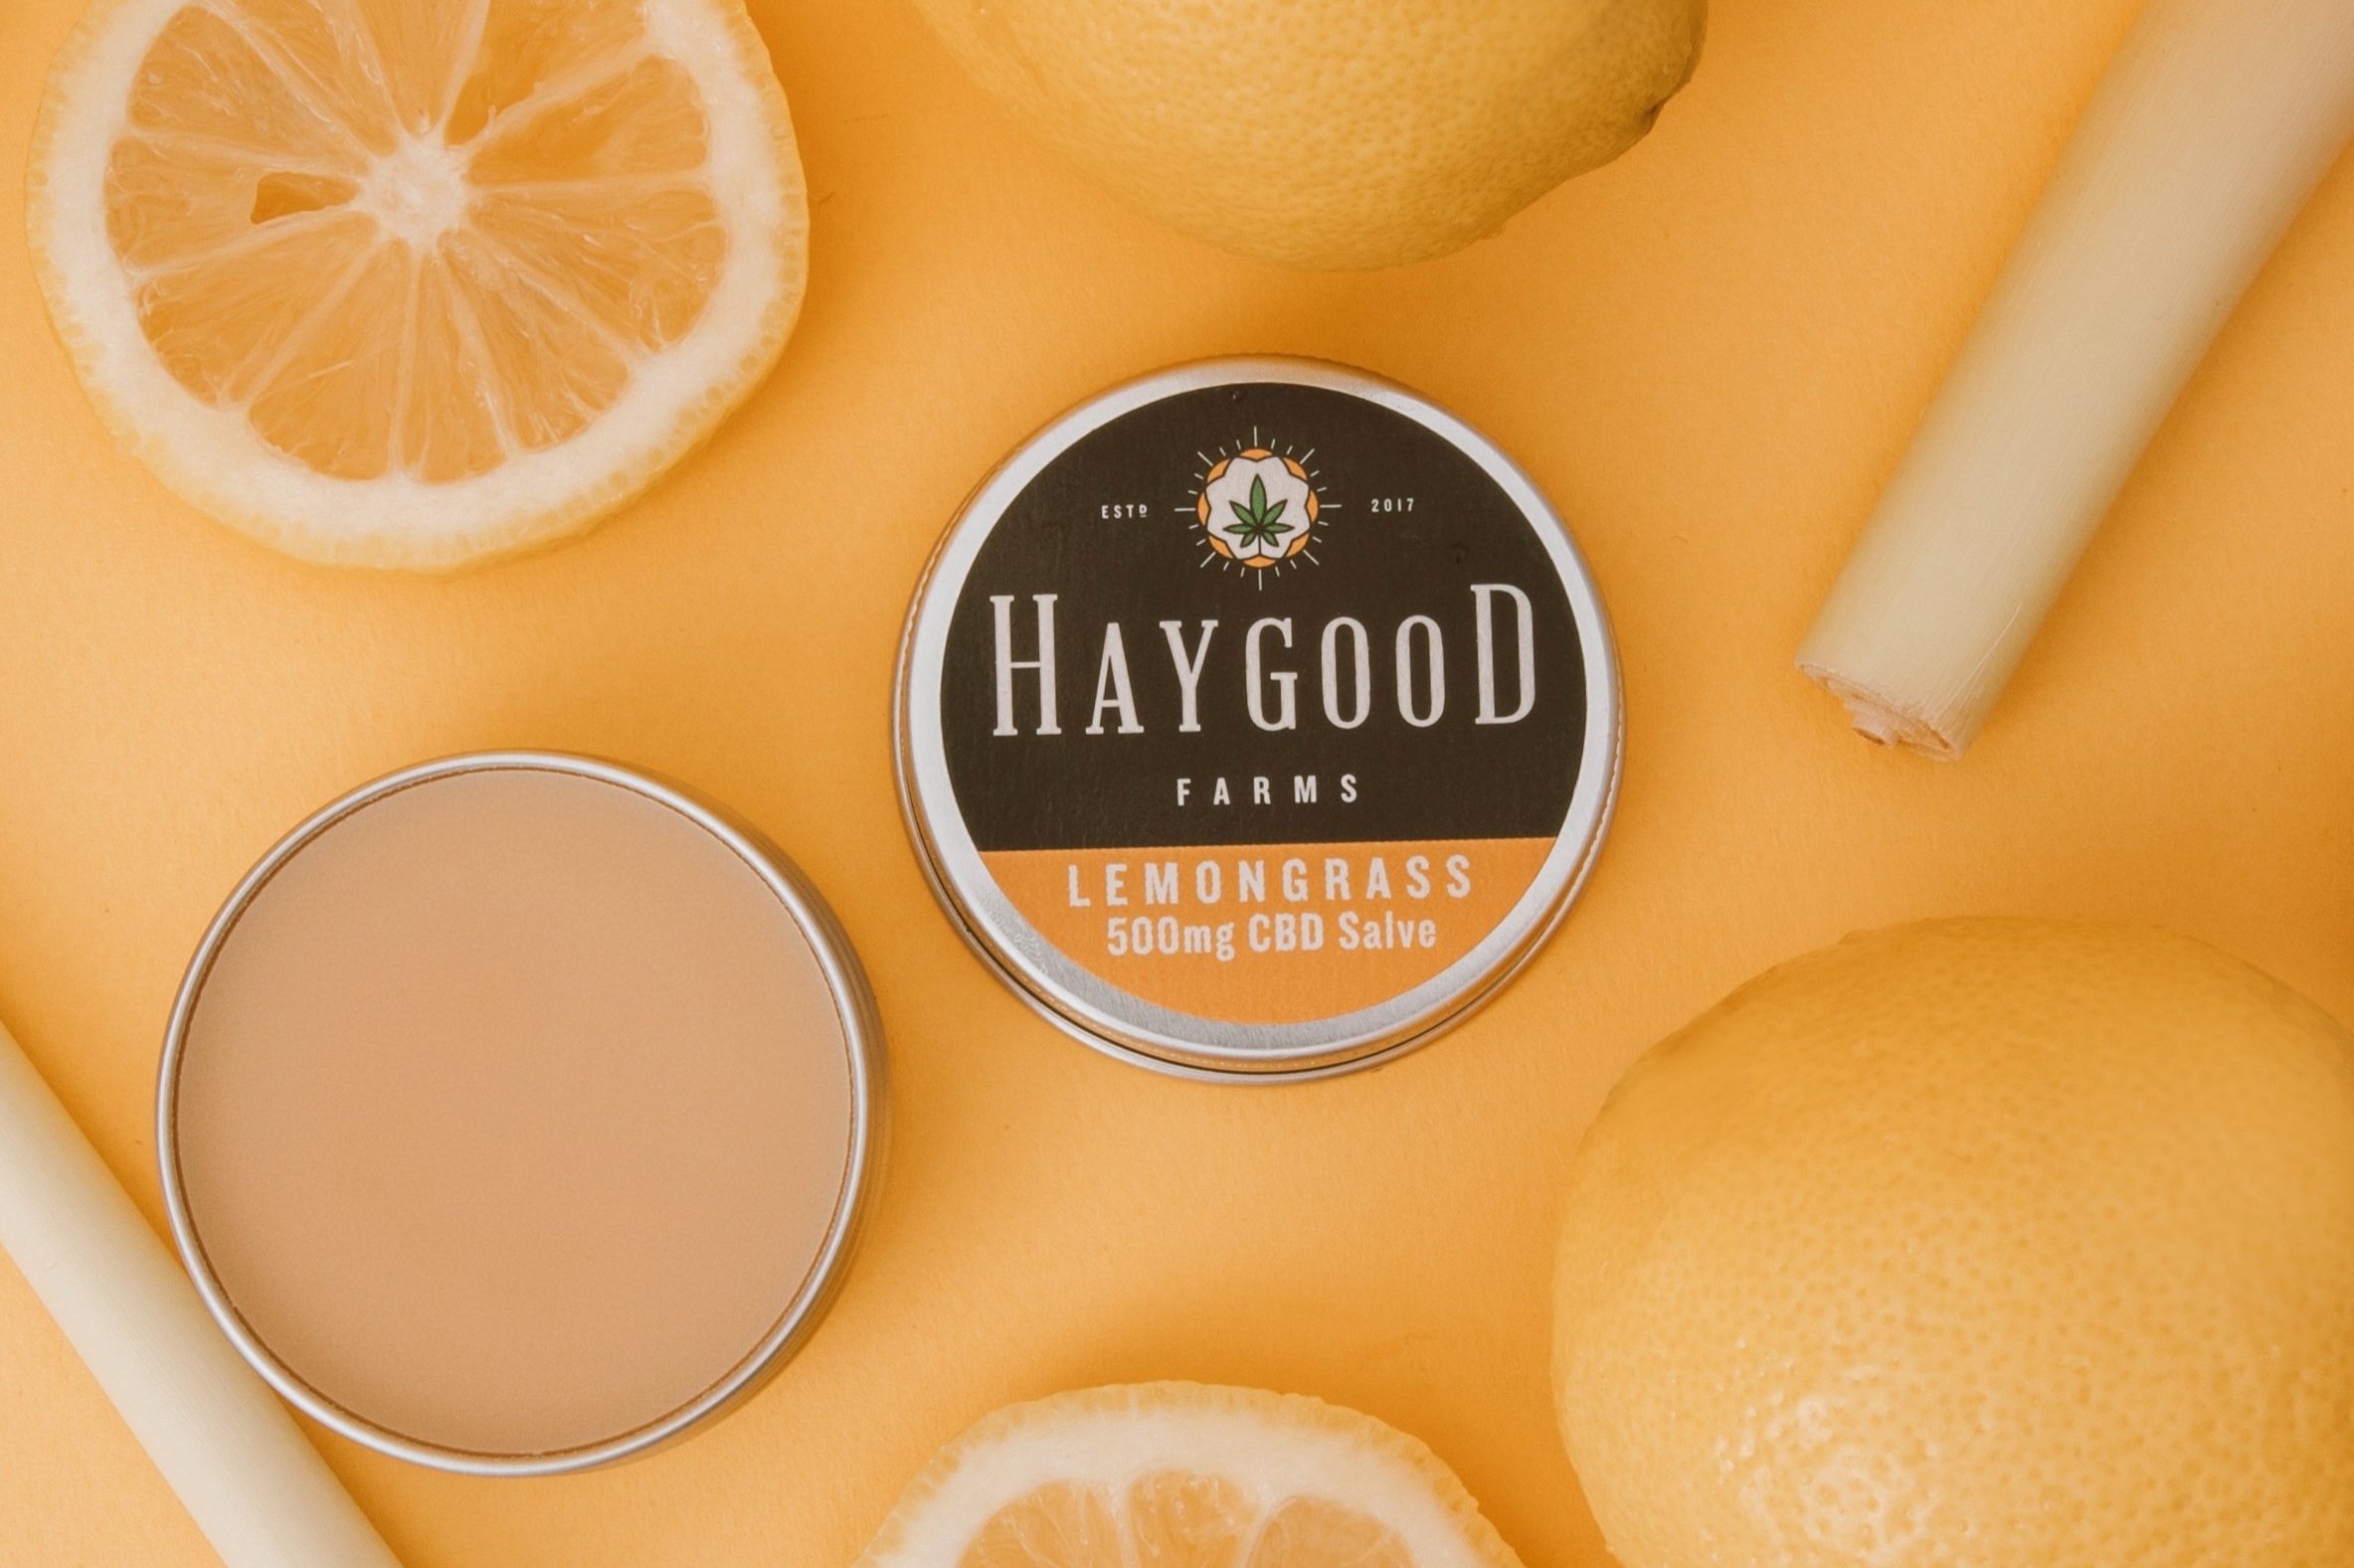 Tabletop Product Shoot for Haygood Farm